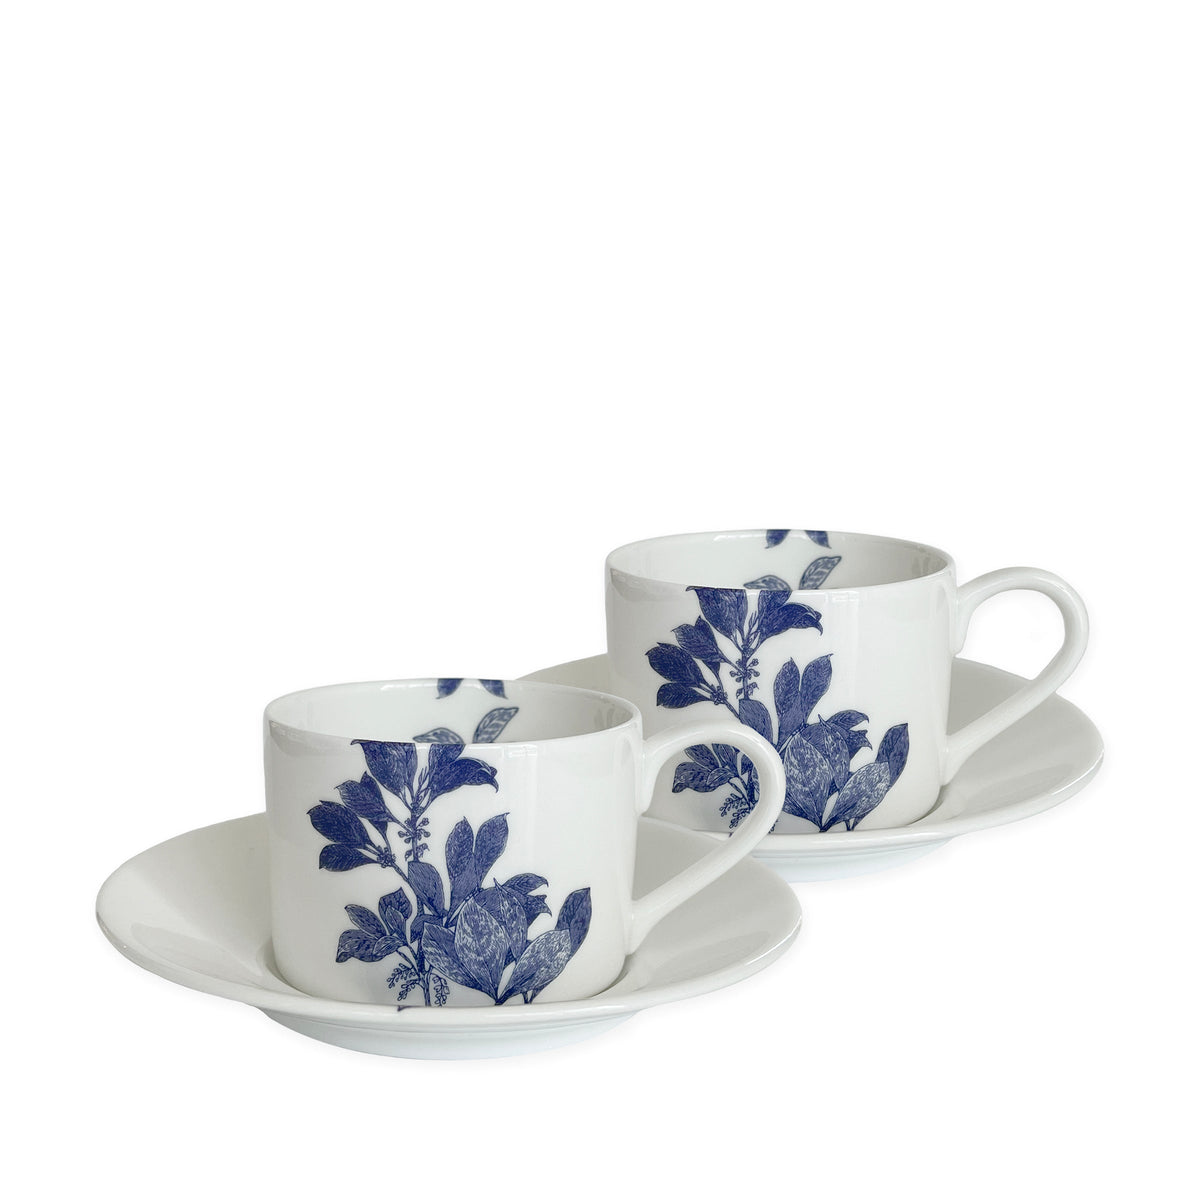 A pair of Blue Arbor Cups &amp; Saucers Set/2 from Caskata Artisanal Home, perfect for tea or coffee enthusiasts looking to add some stylish blue and white dinnerware to their collection.